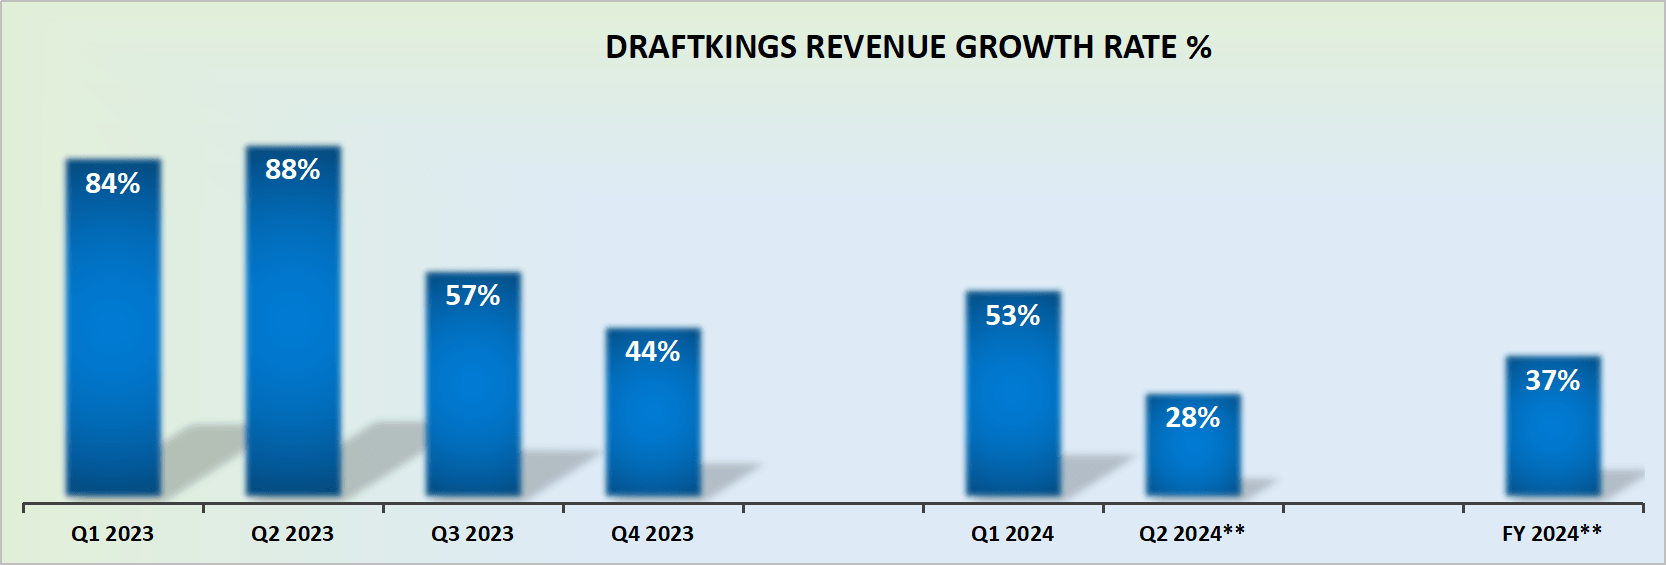 DKNG revenue growth rates